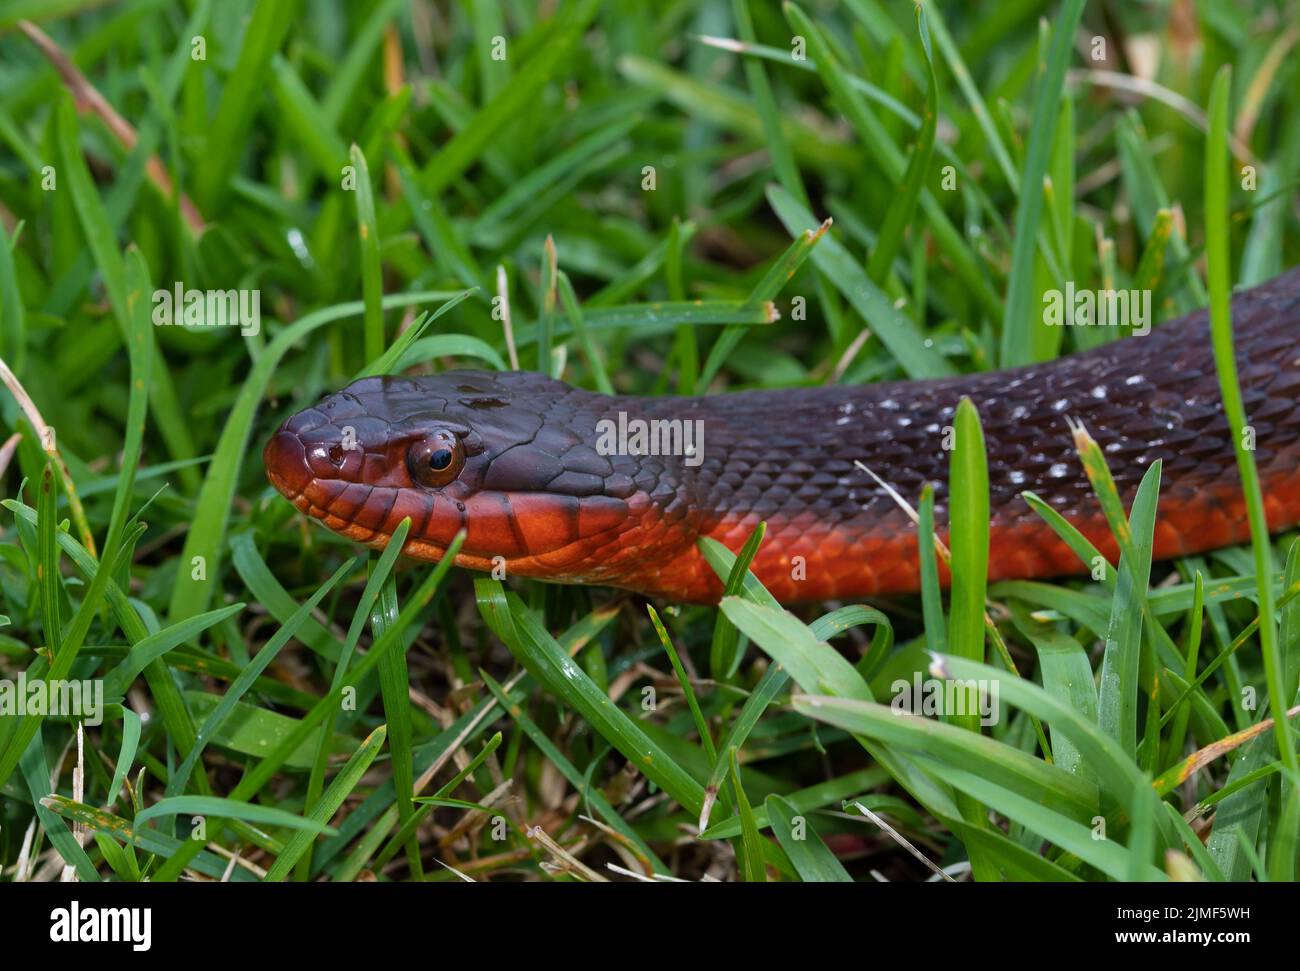 Red-bellied watersnake on green grass up close Stock Photo